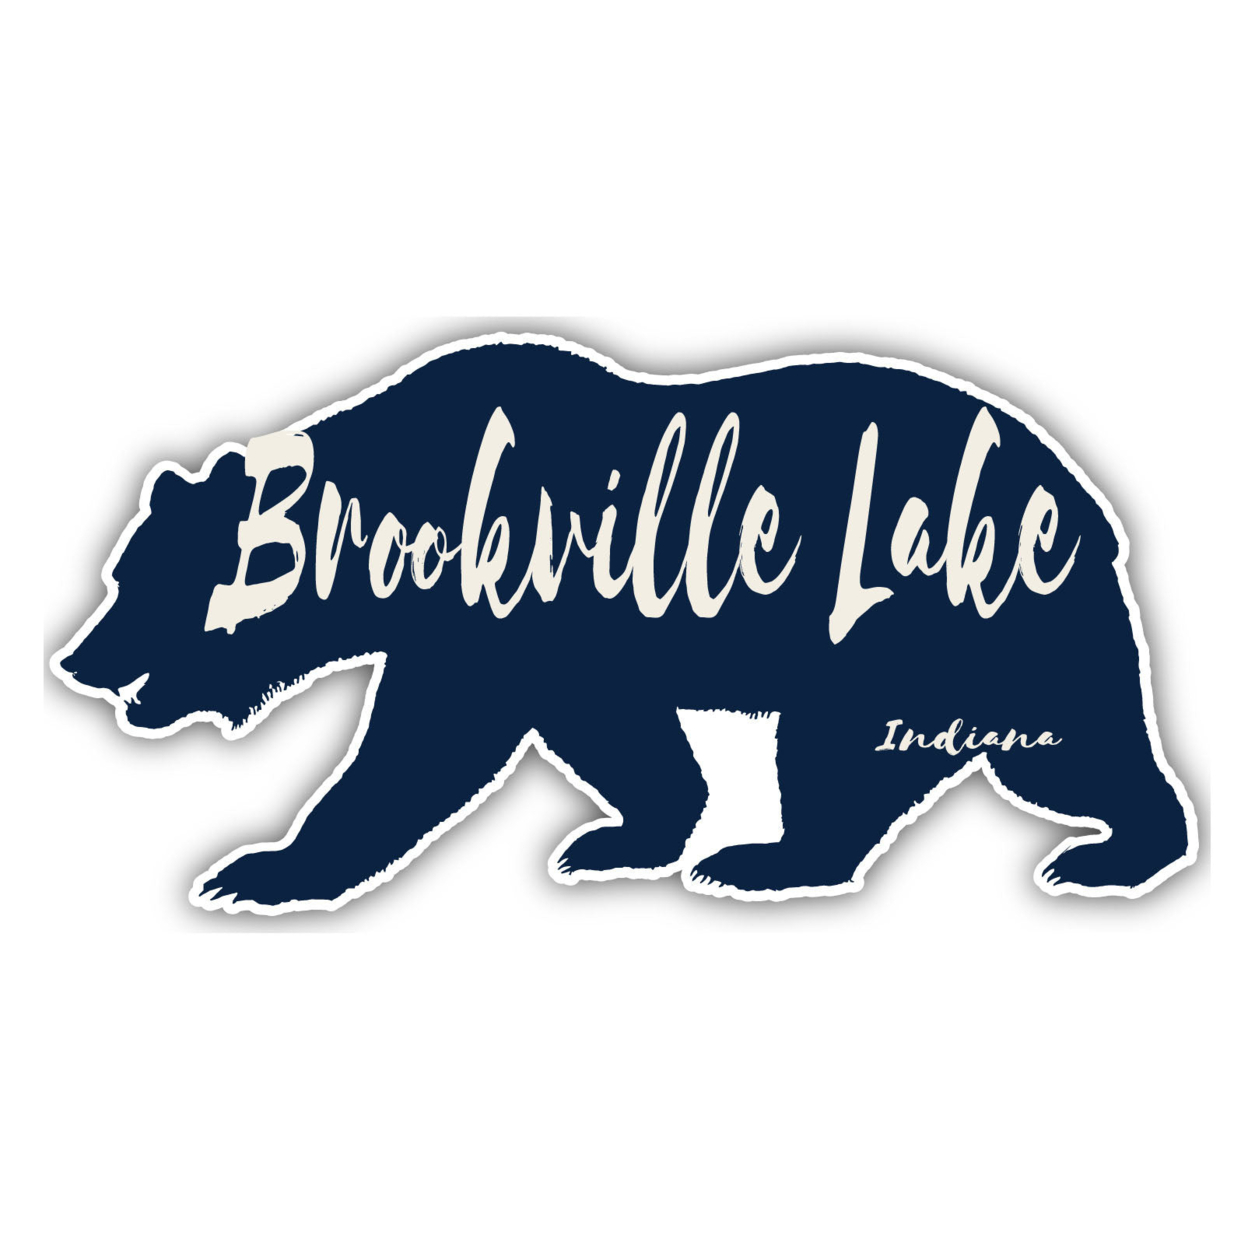 Brookville Lake Indiana Souvenir Decorative Stickers (Choose Theme And Size) - Single Unit, 10-Inch, Great Outdoors